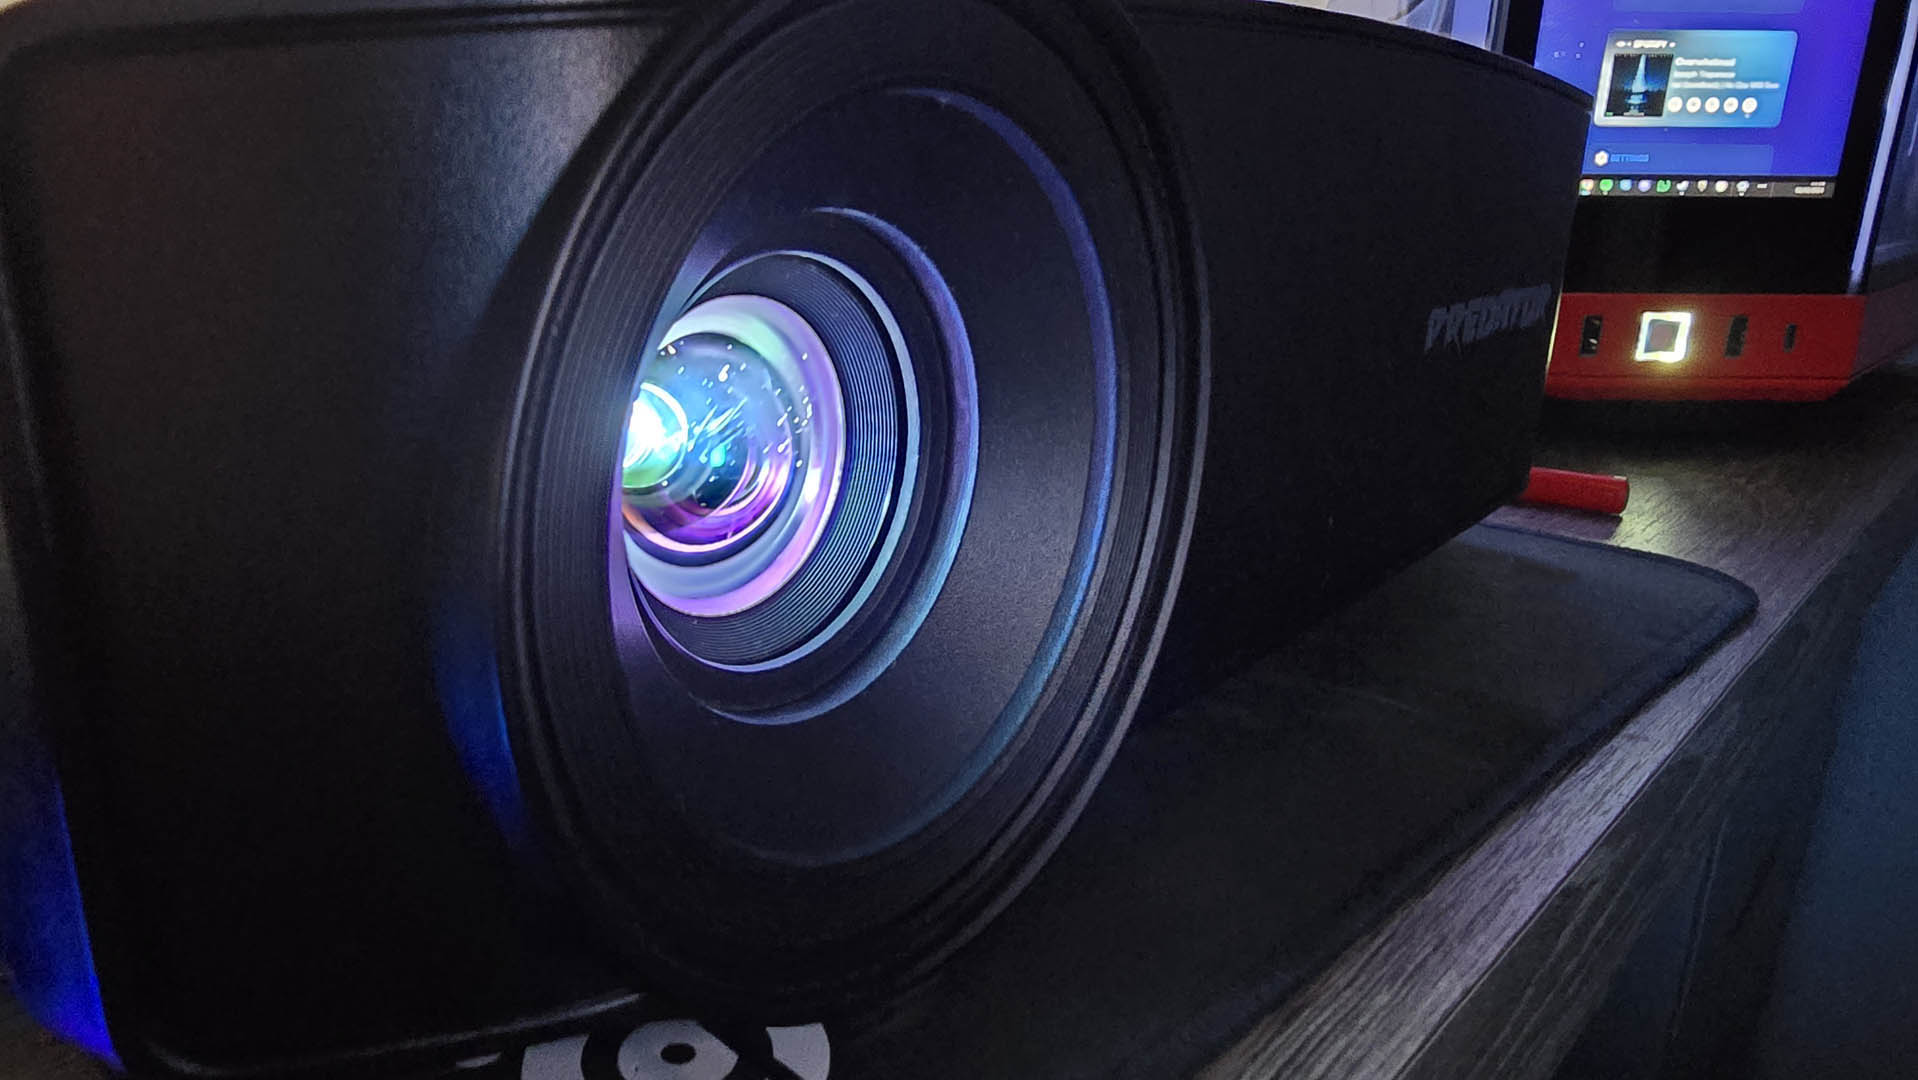 The Acer Predator G711 projector lens up-close